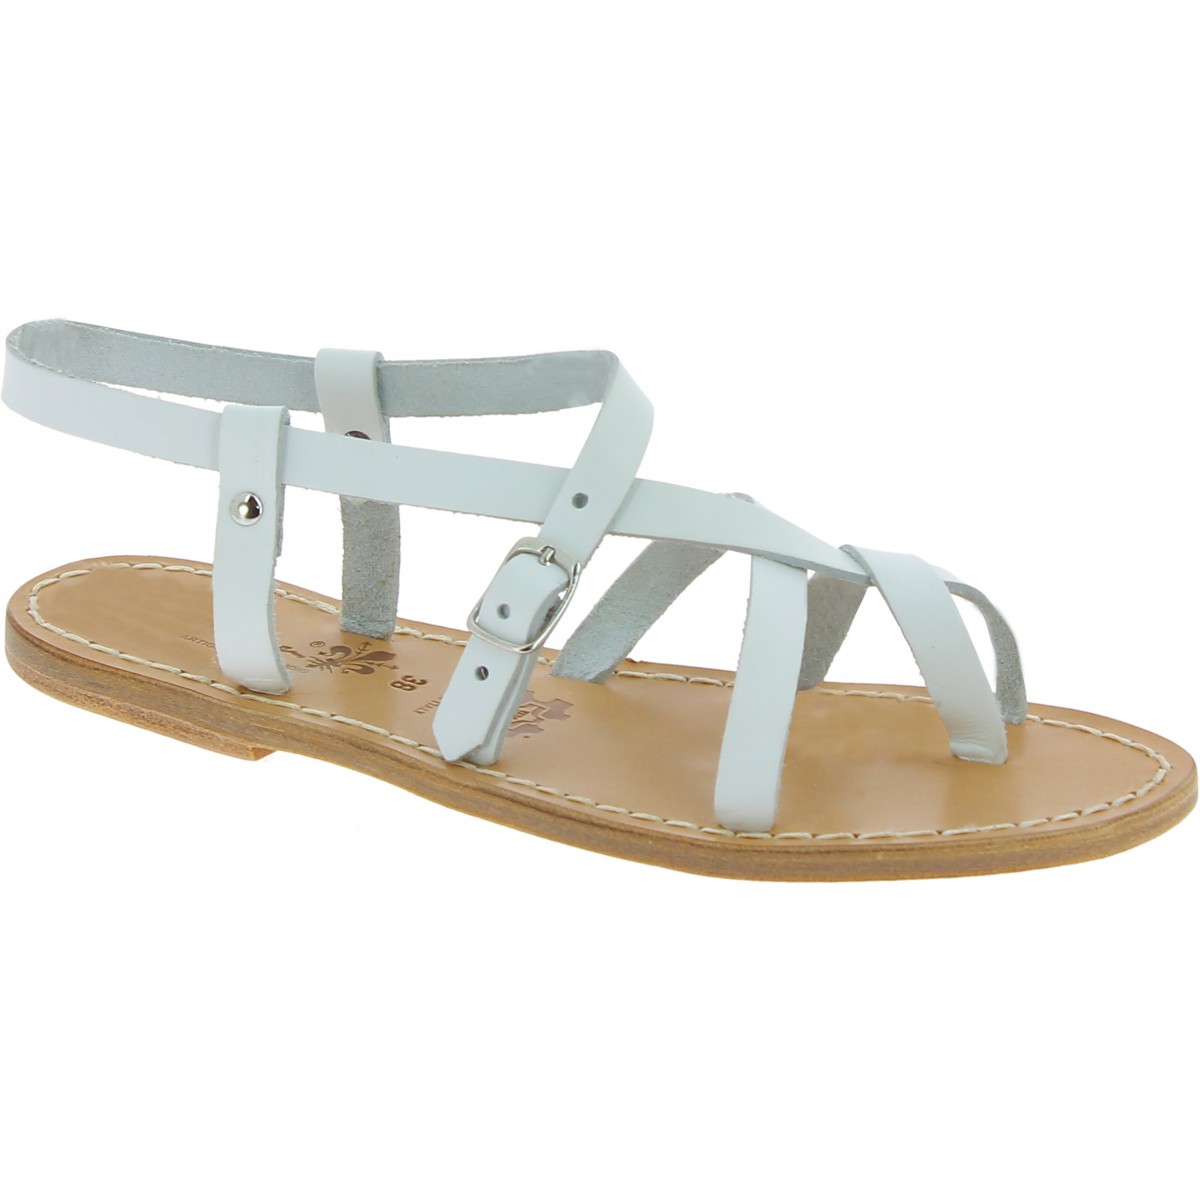 White leather flat sandals for women handmade in Italy | The leather ...